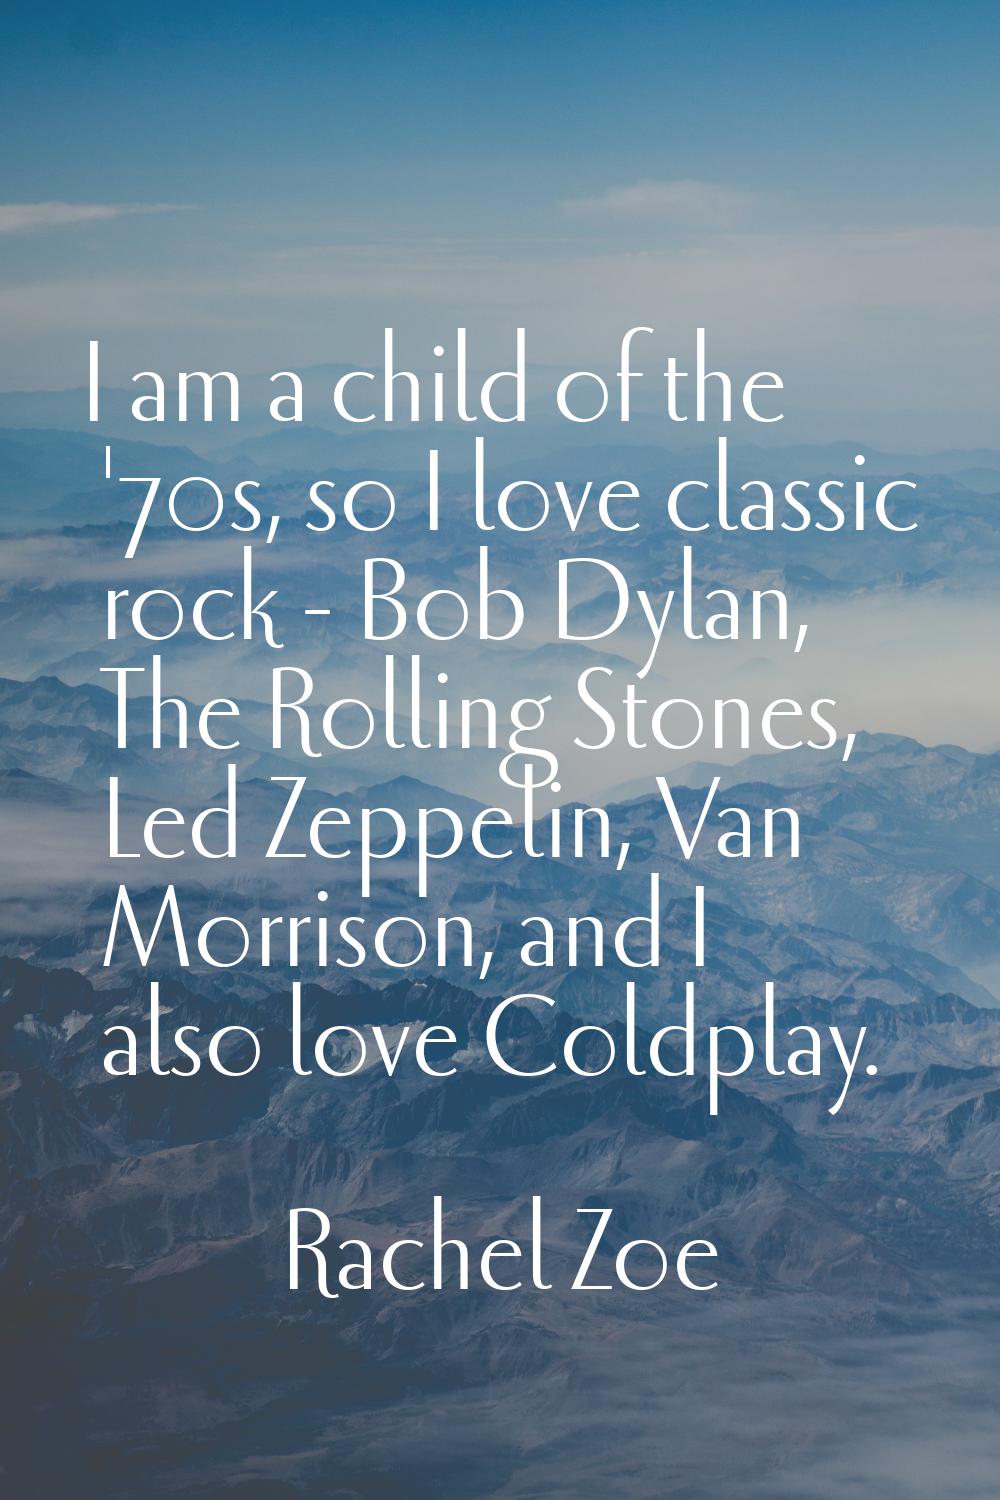 I am a child of the '70s, so I love classic rock - Bob Dylan, The Rolling Stones, Led Zeppelin, Van